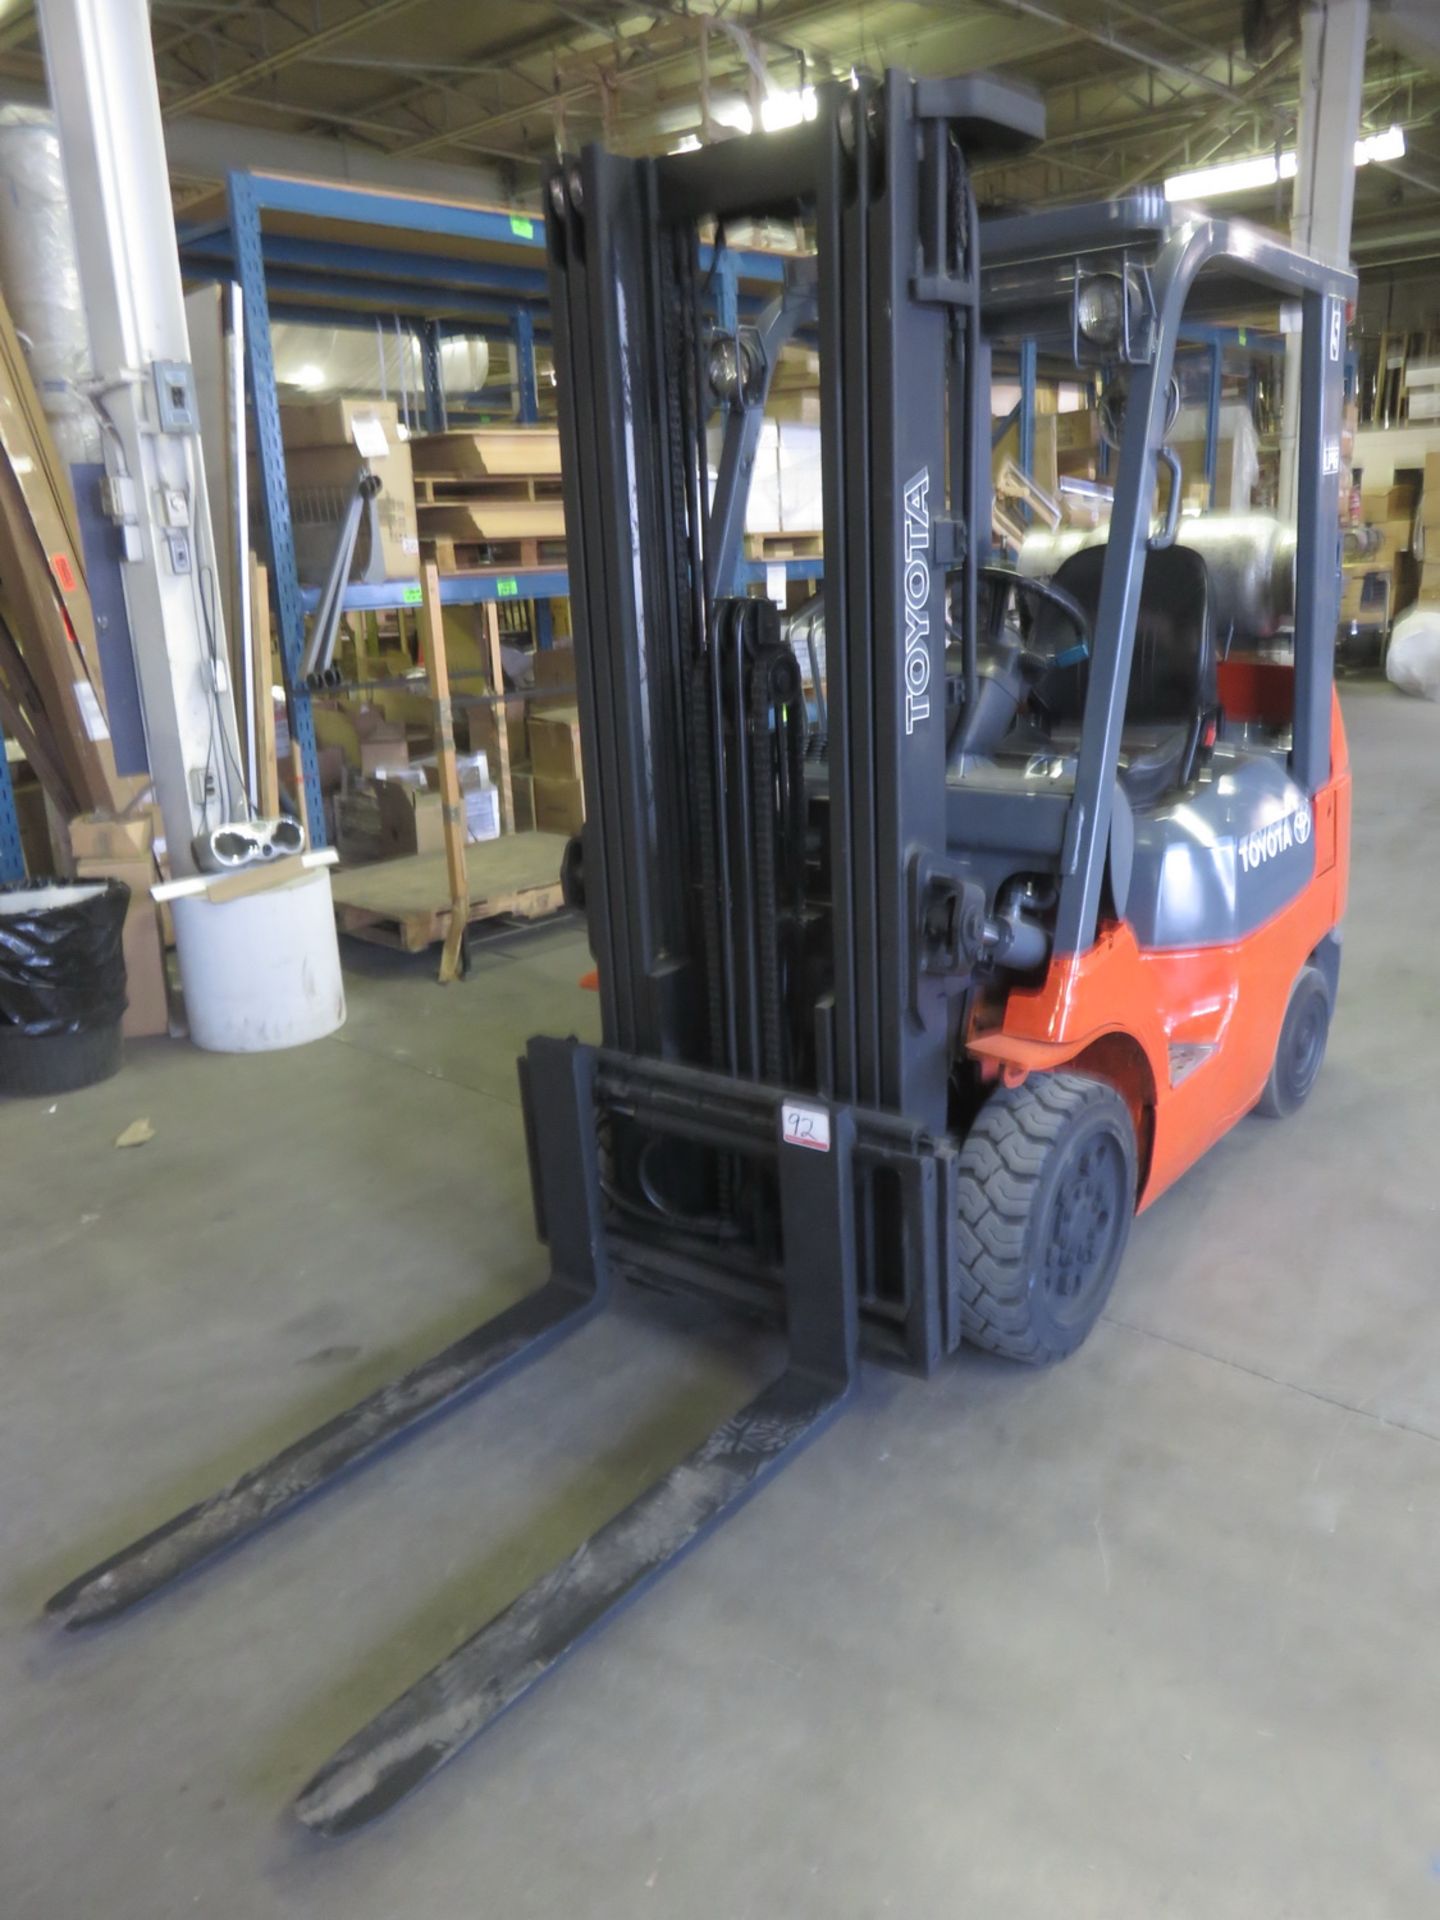 TOYOTA 7FGCU25 5,000LBS CAP PROPANE POWERED FORKLIFT W/ 189" LIFT, 3-STAGE MAST, & SIDE SHIFT, S/N